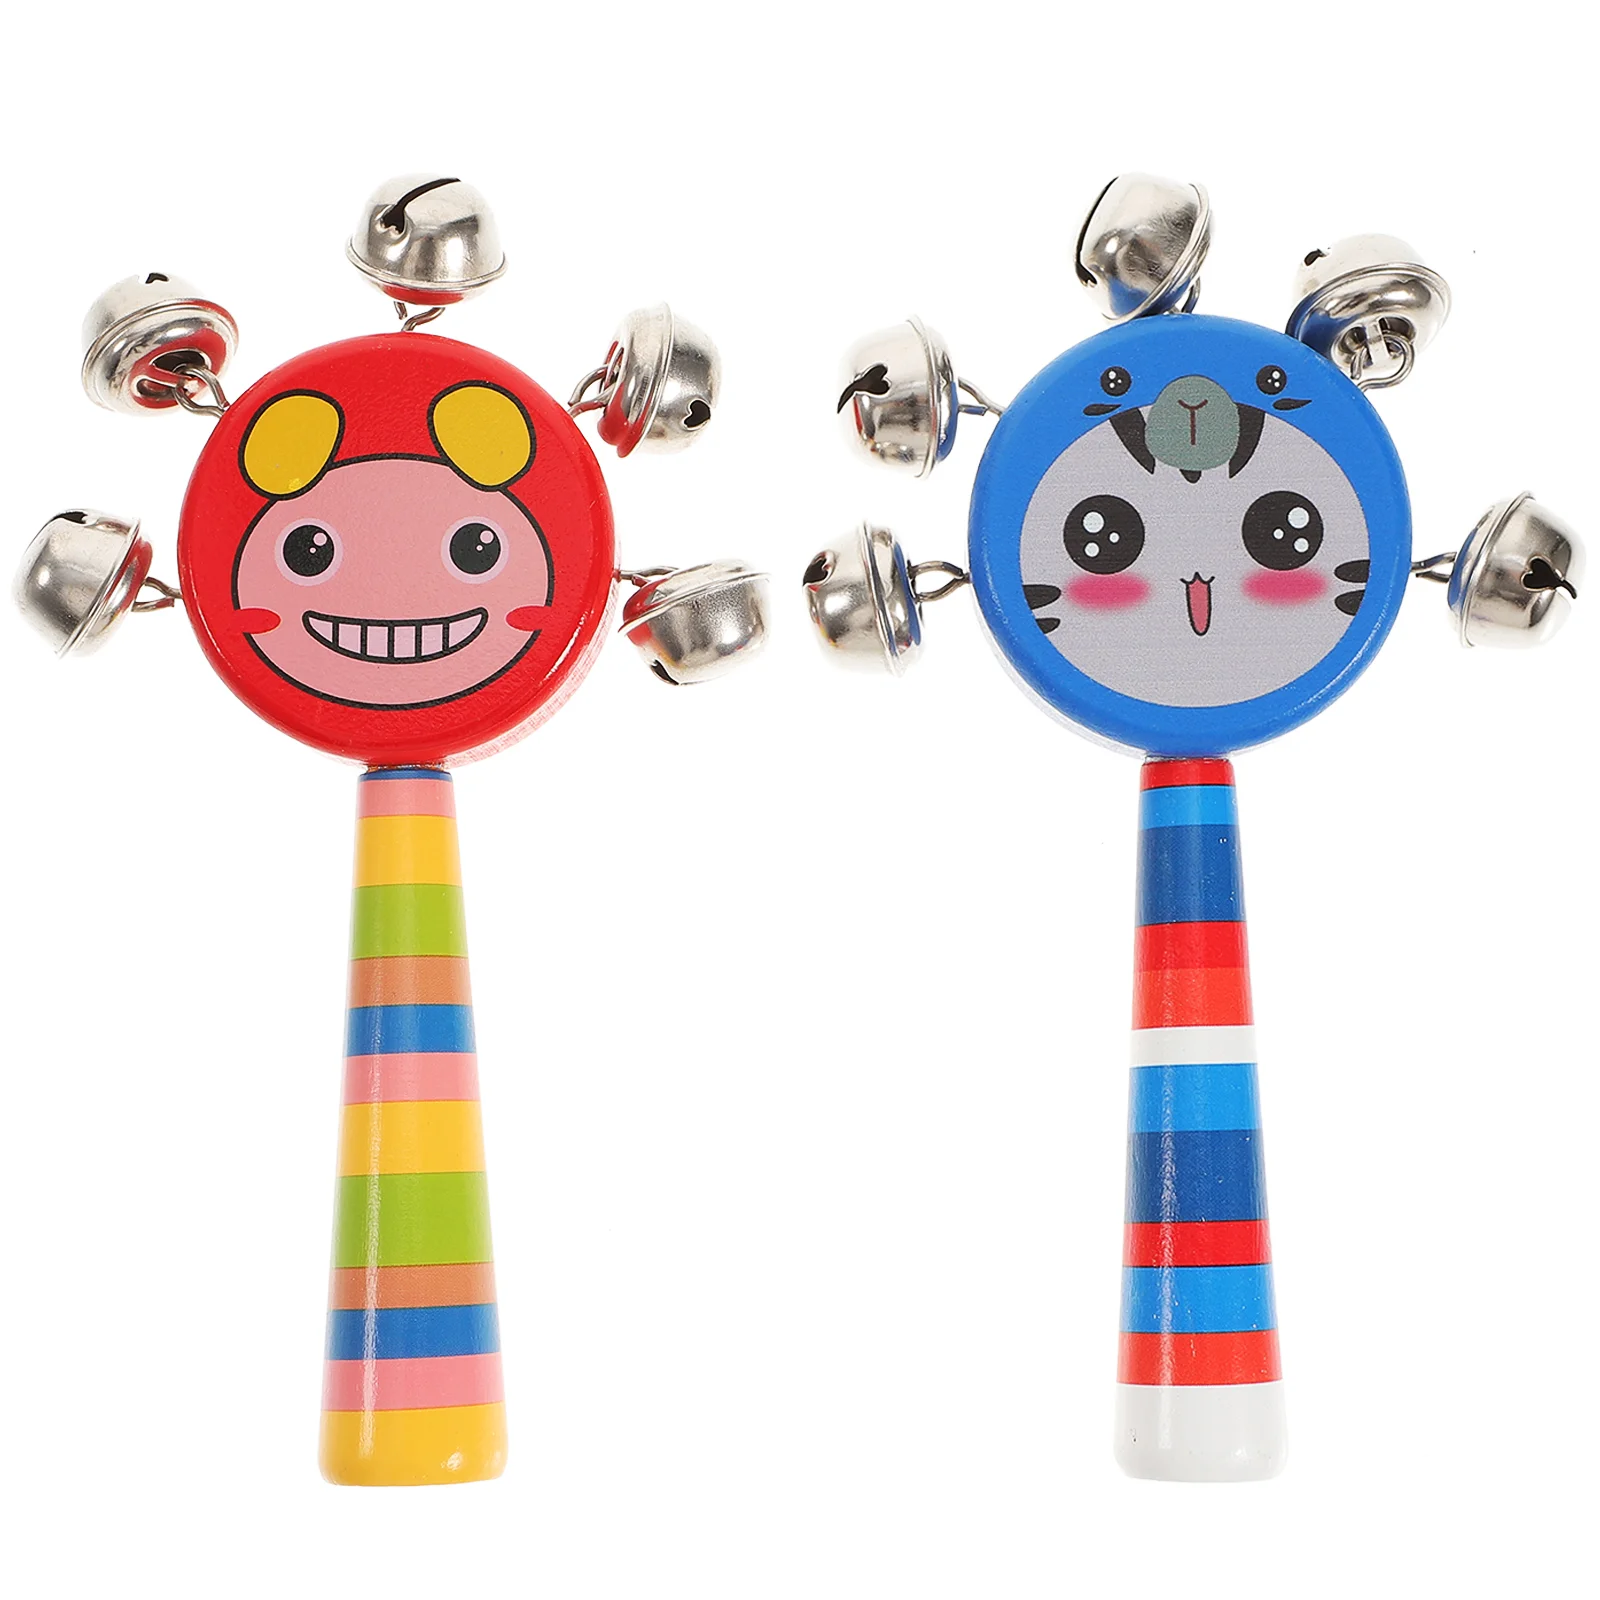 

2 PCS Early Education Educational Hand Bell Rhythm Handbell Toys Musical Instrument for Metal Child